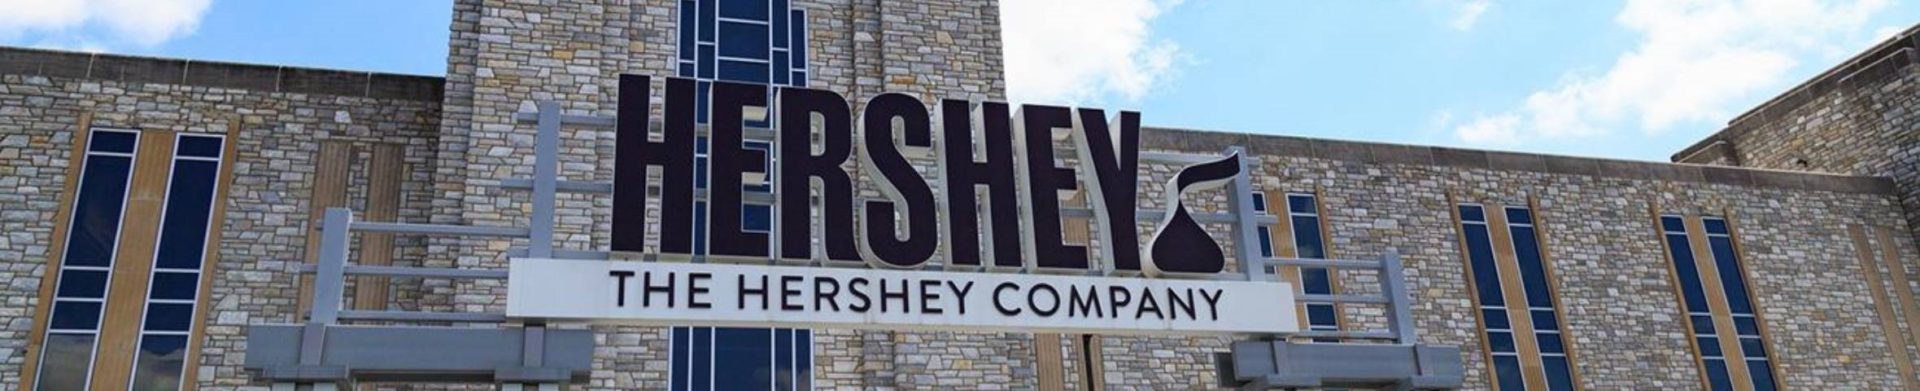 The headquarters of Hershey's at daytime